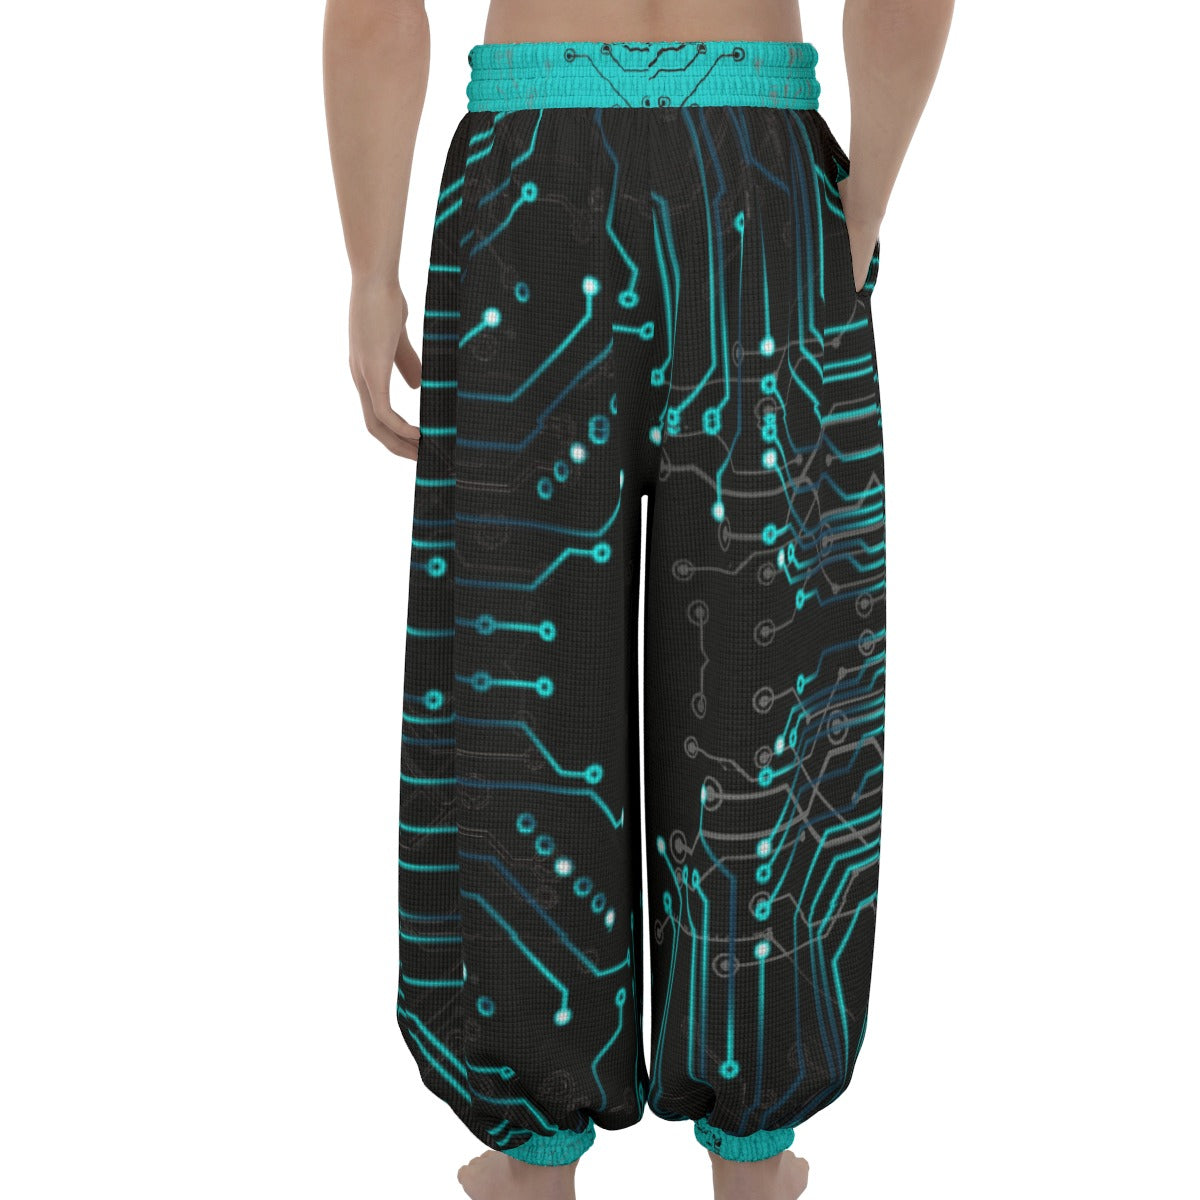 Stand out  with the  Glitched Unisex Lantern Pants  available at Hey Nugget. Grab yours today!